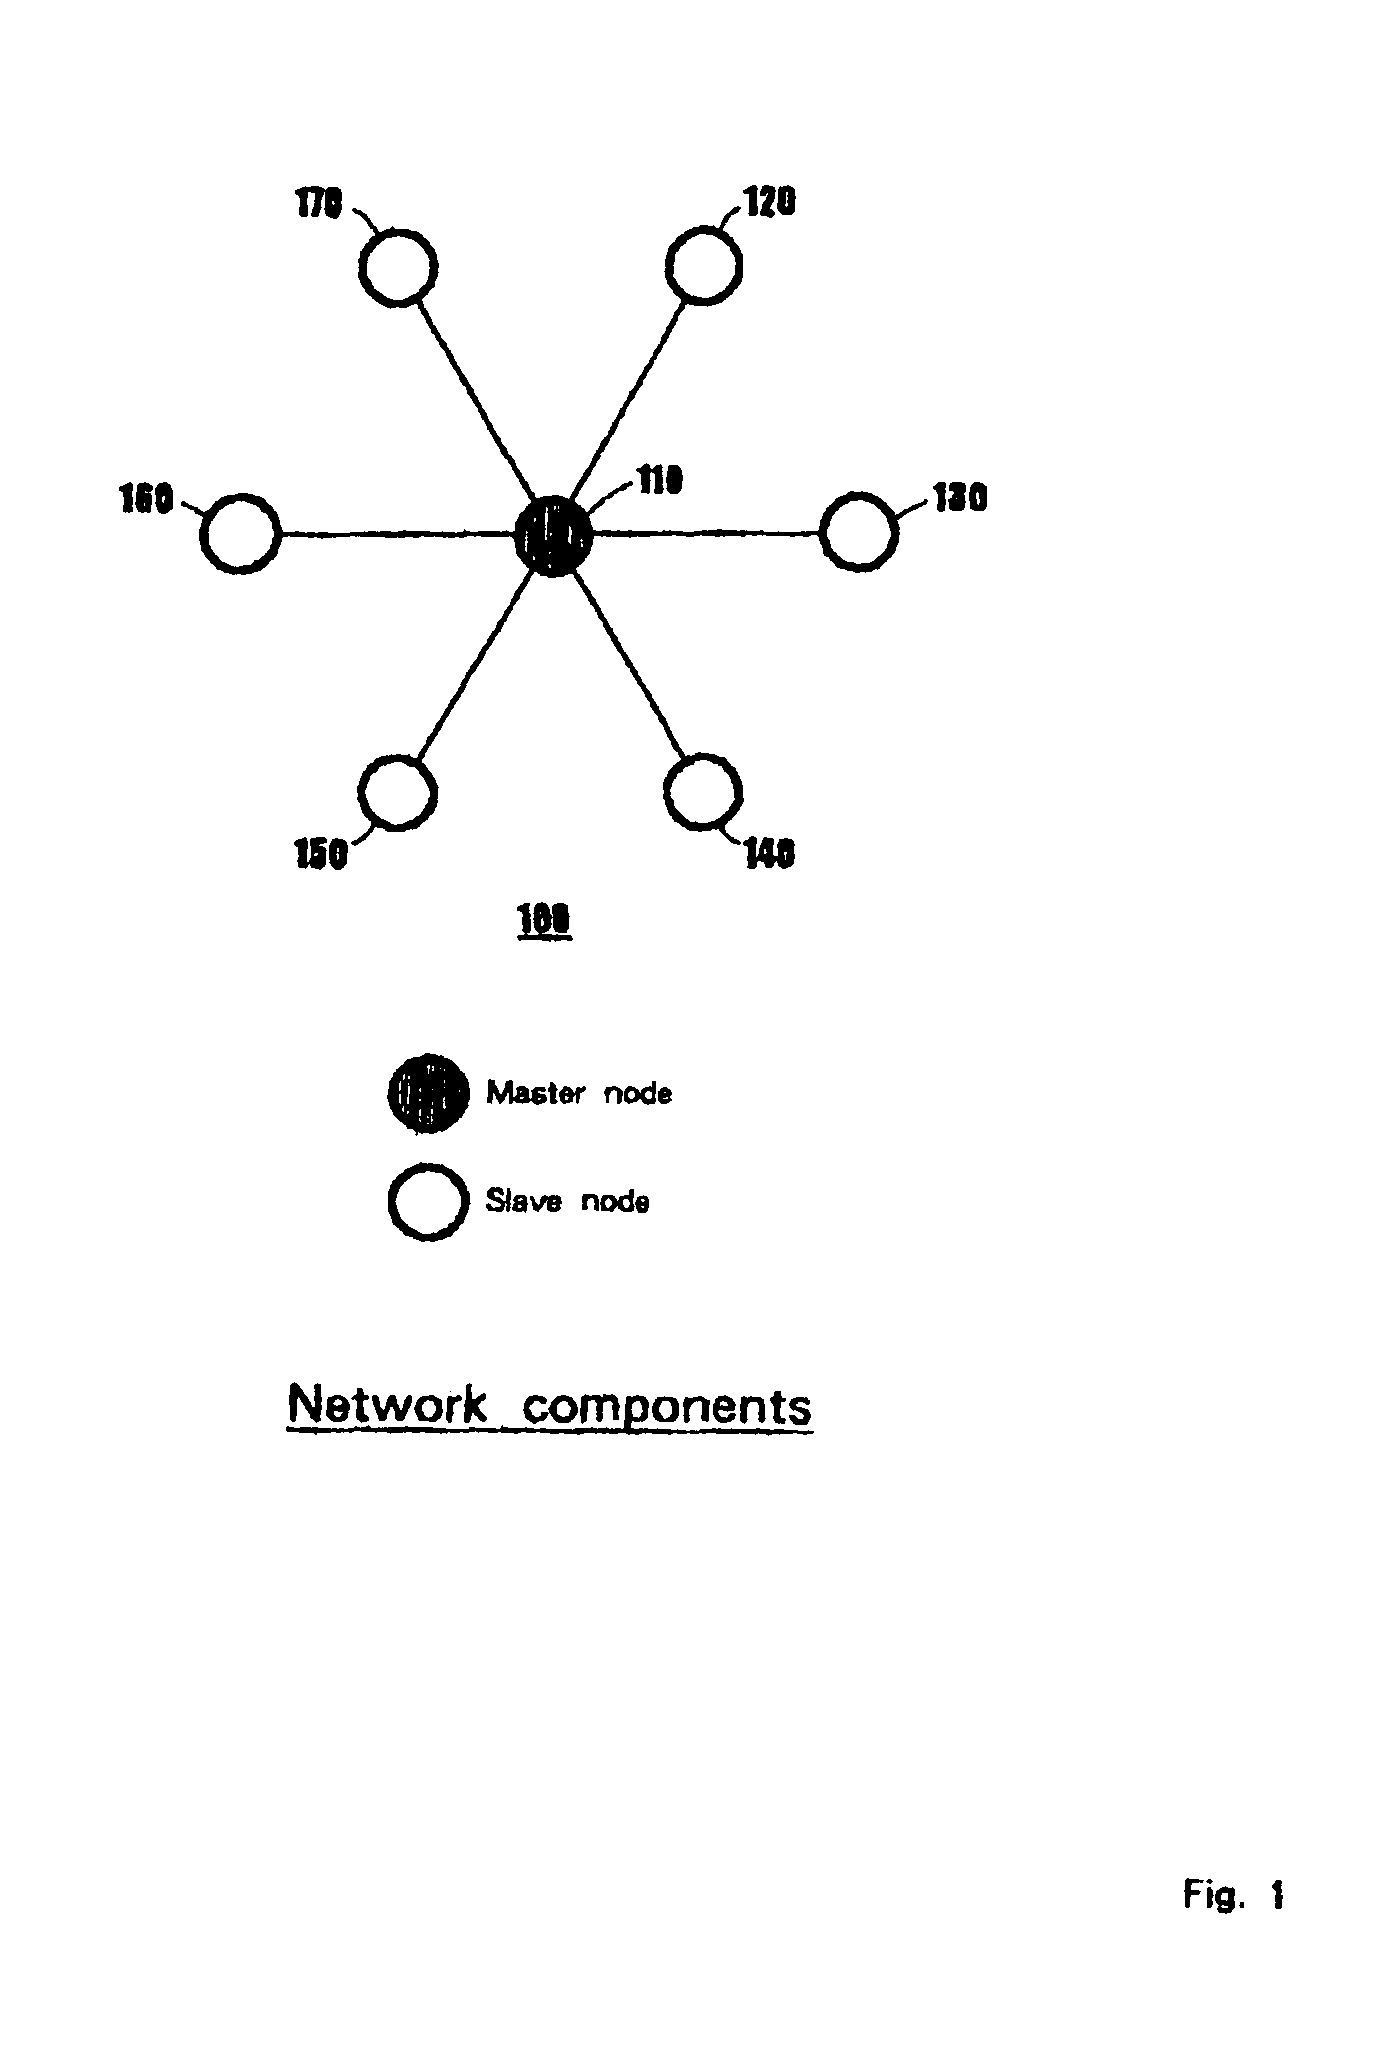 Method and apparatus for searching for radio station for wireless ad hoc communication network